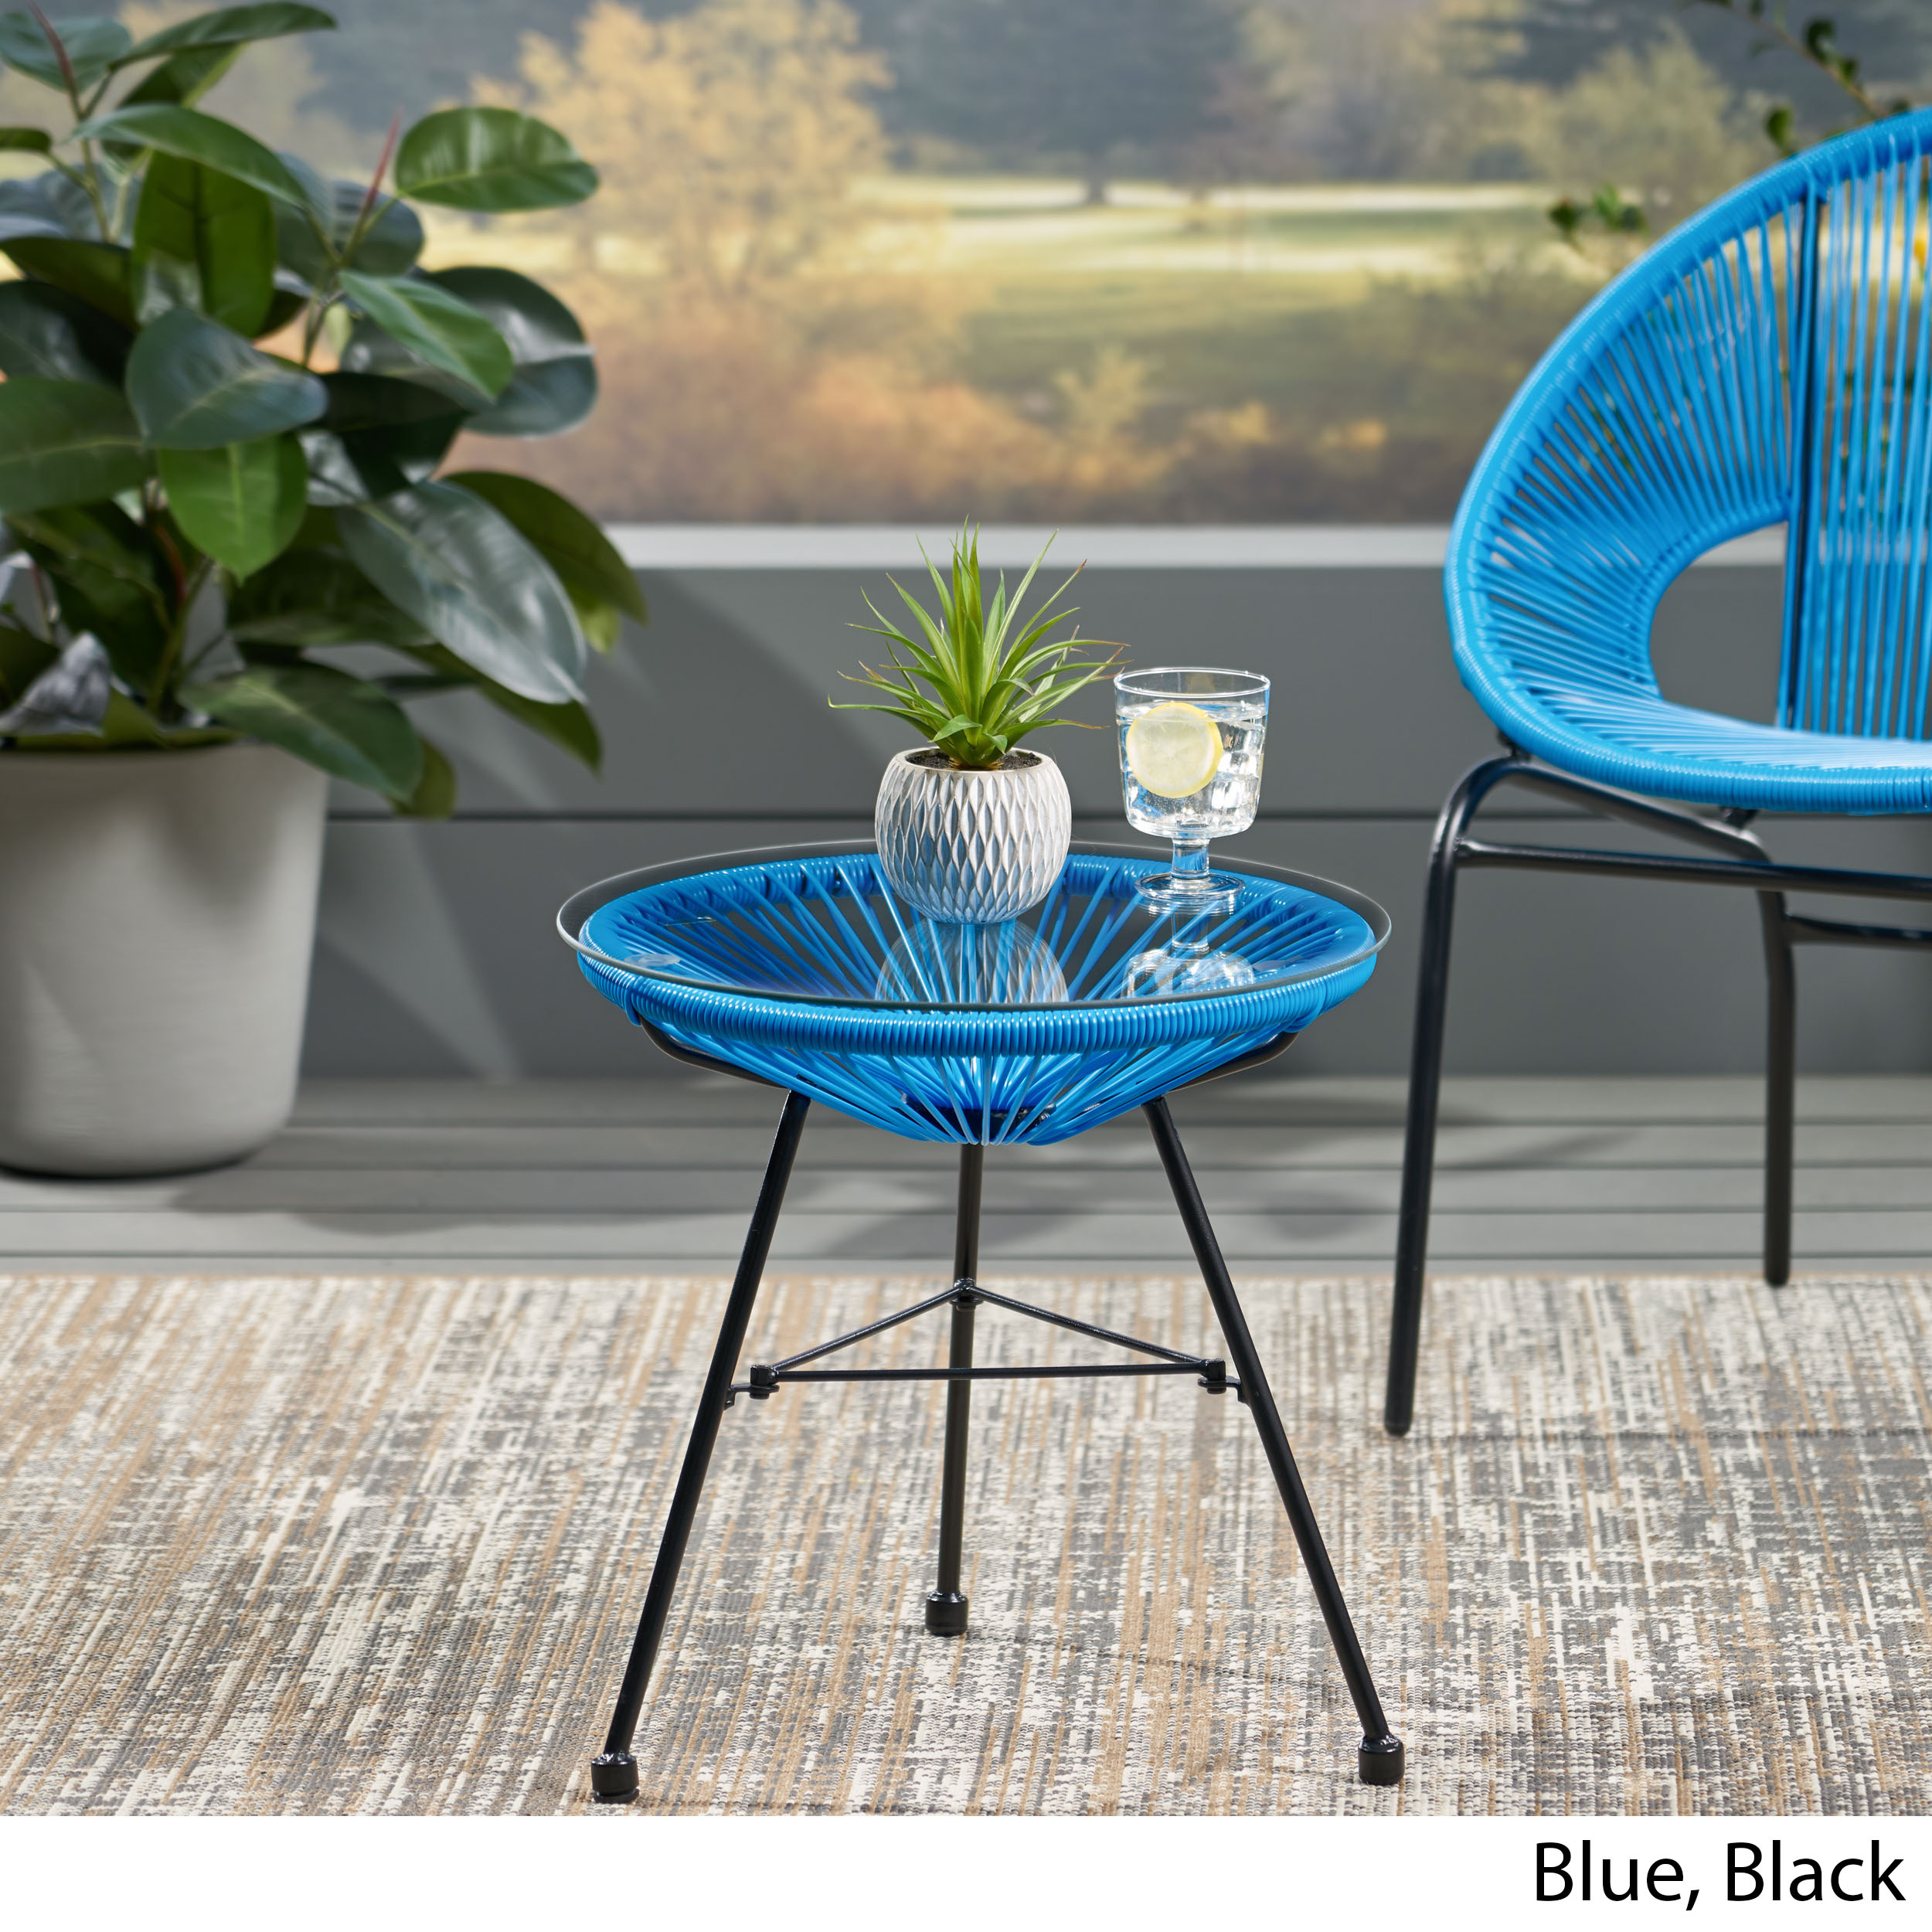 GDF Studio Chrissy Outdoor Modern Faux Rattan Side Table with Tempered Glass Top, Blue and Black - image 3 of 9